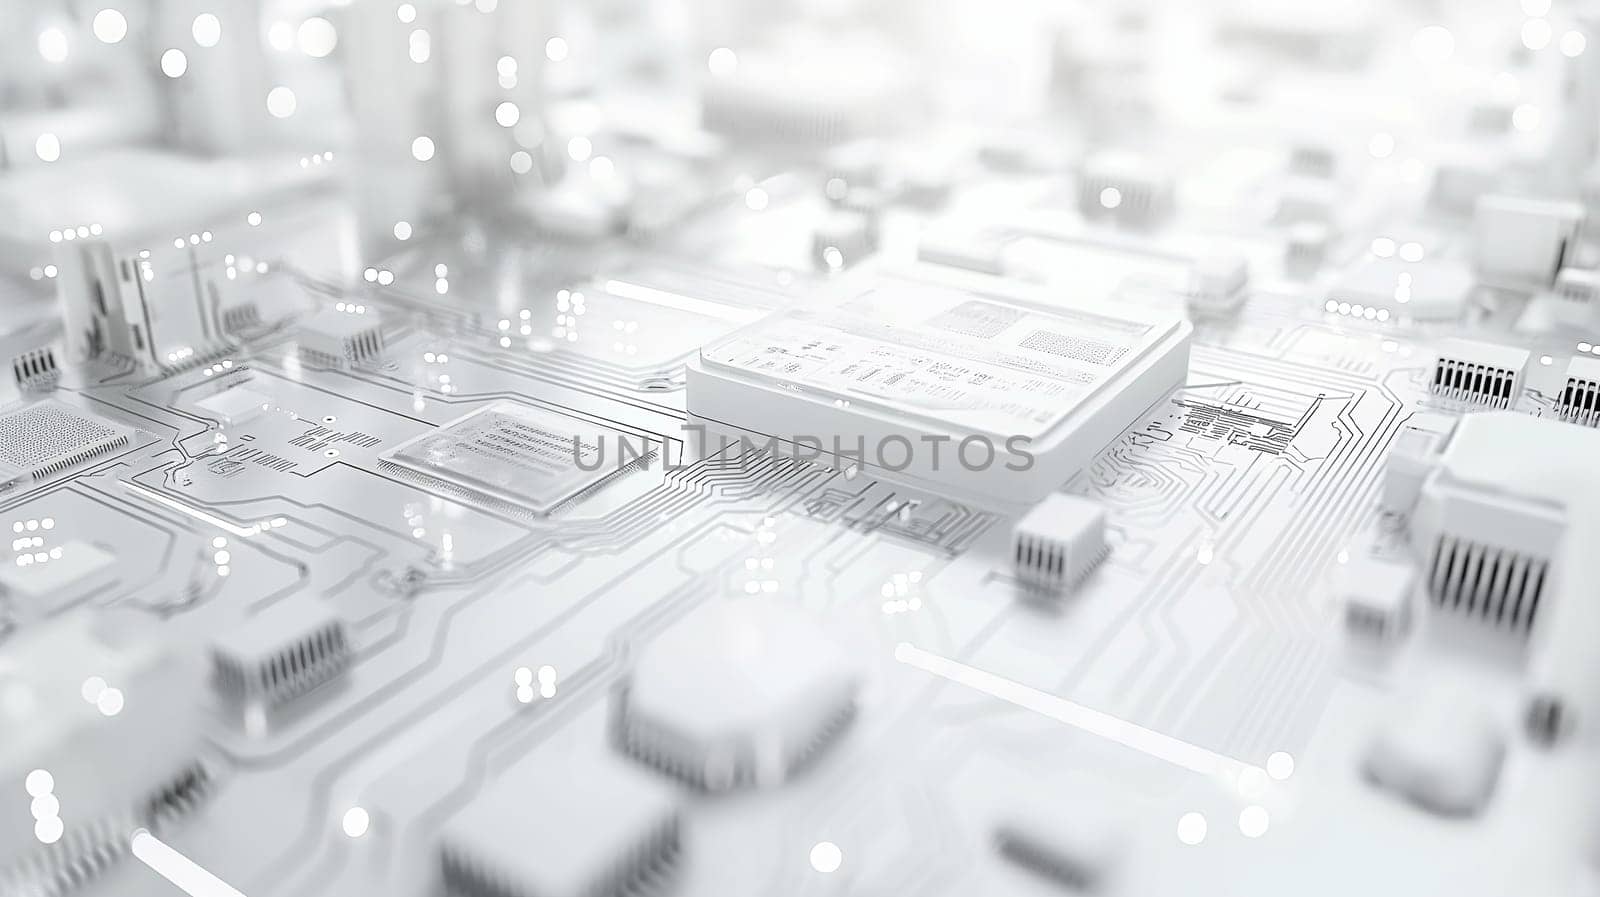 Close-Up View of a Modern Circuit Board in Monochromatic Tones by chrisroll